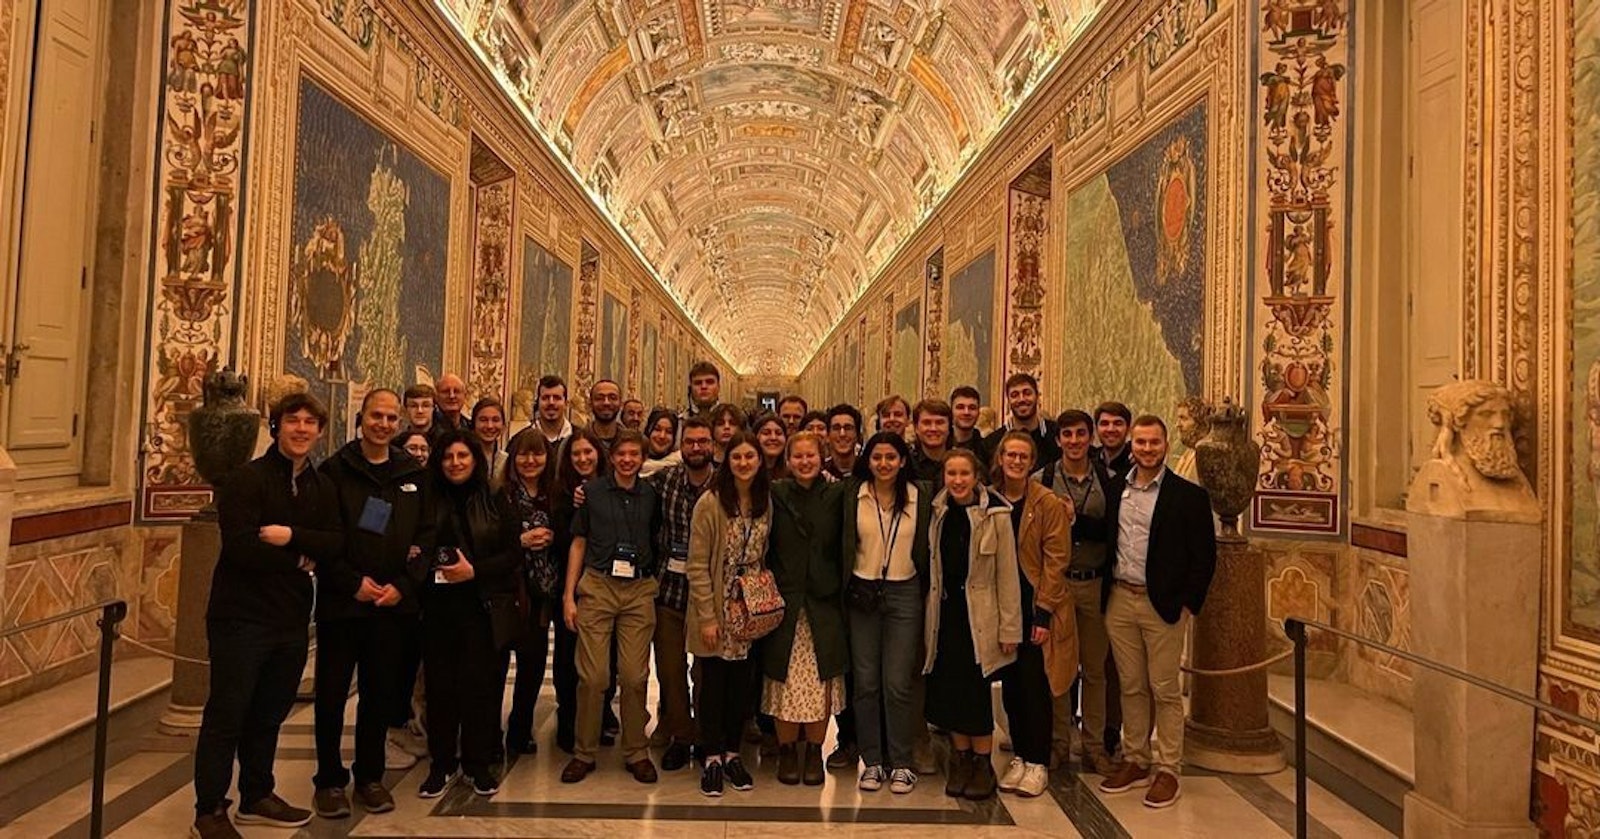 Students from Fr. Gabriel Richard High School in Ann Arbor visited the Sistine Chapel during a trip to Italy that was planned well before they knew they would be attending Pope Benedict XVI's funeral. (Photo courtesy of Fr. Gabriel Richard High School)